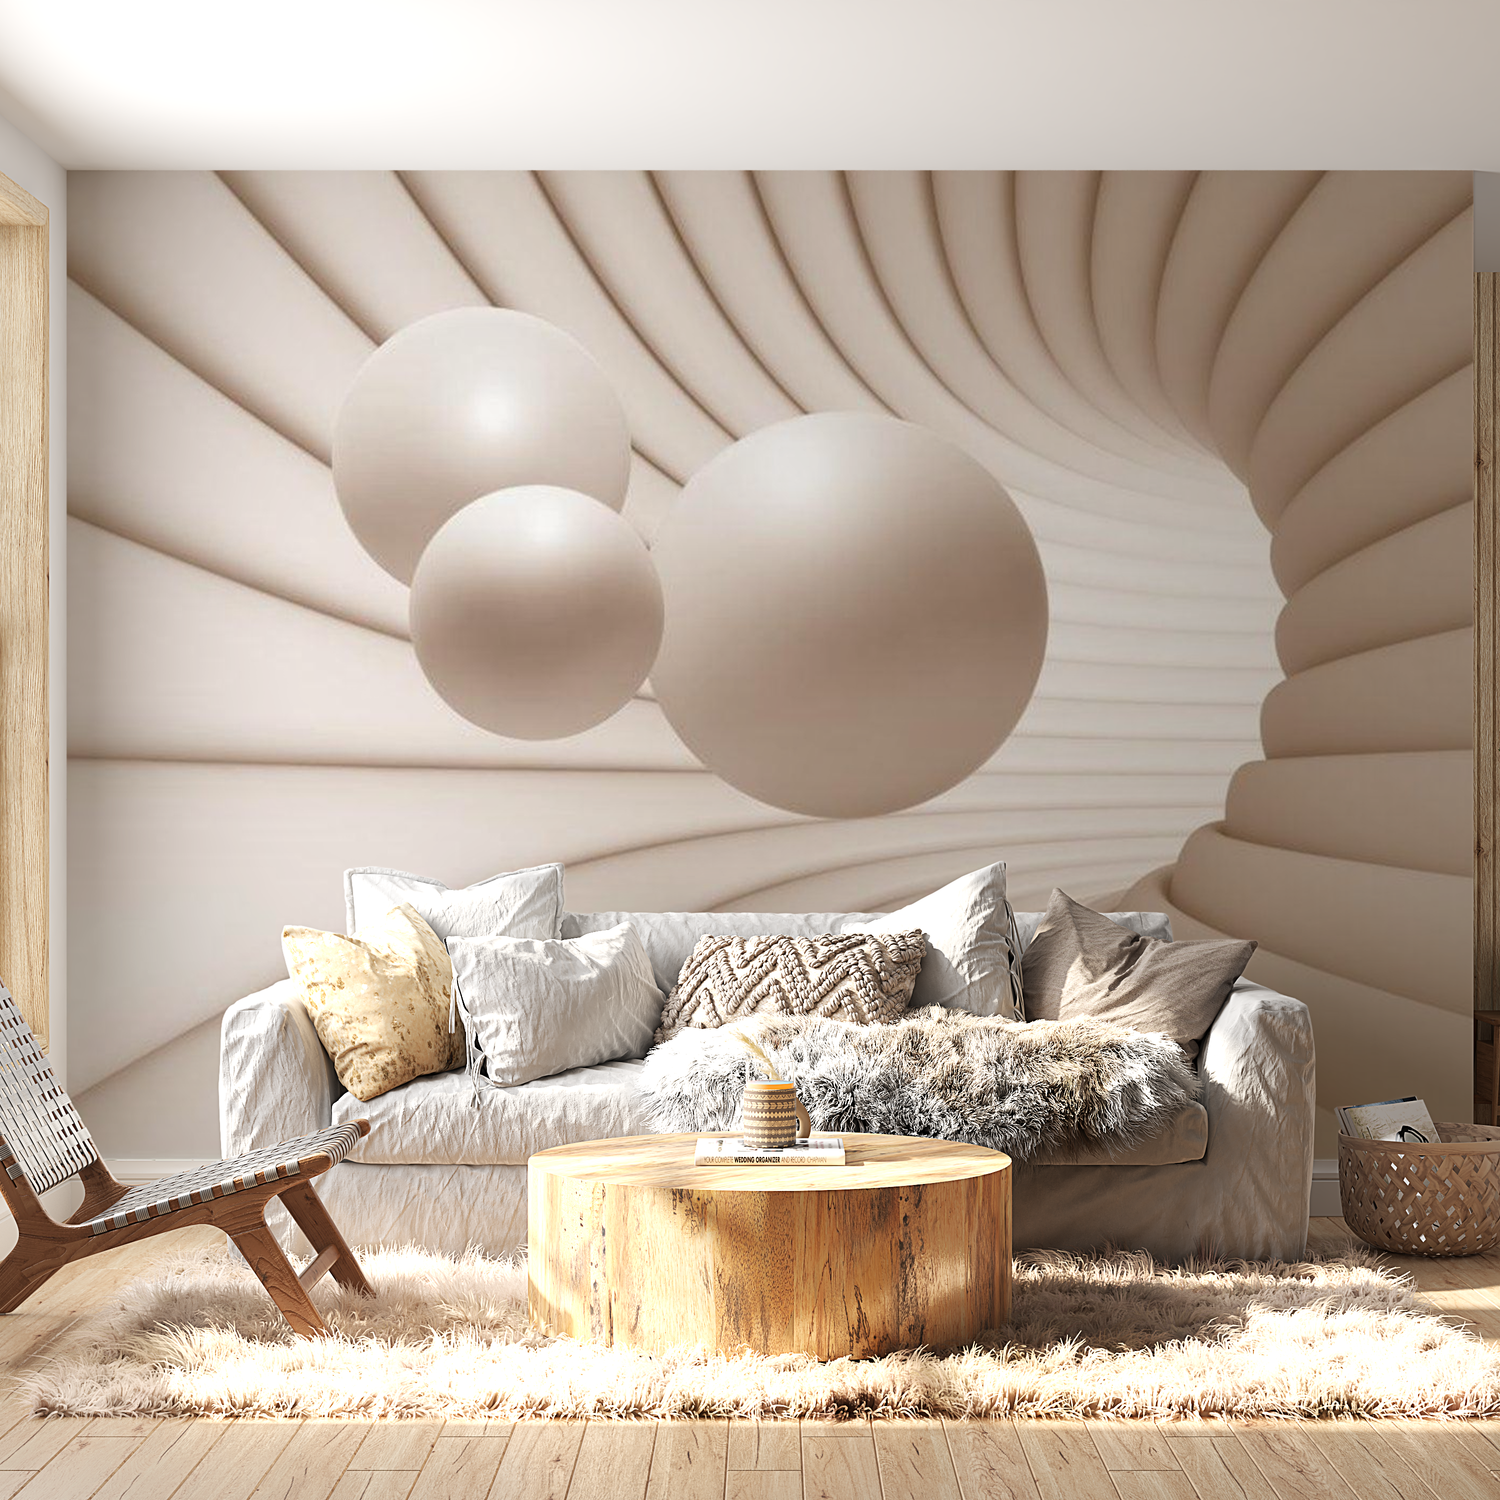 3D Illusion Wallpaper Wall Mural - Balls In The Tunnel 39"Wx27"H